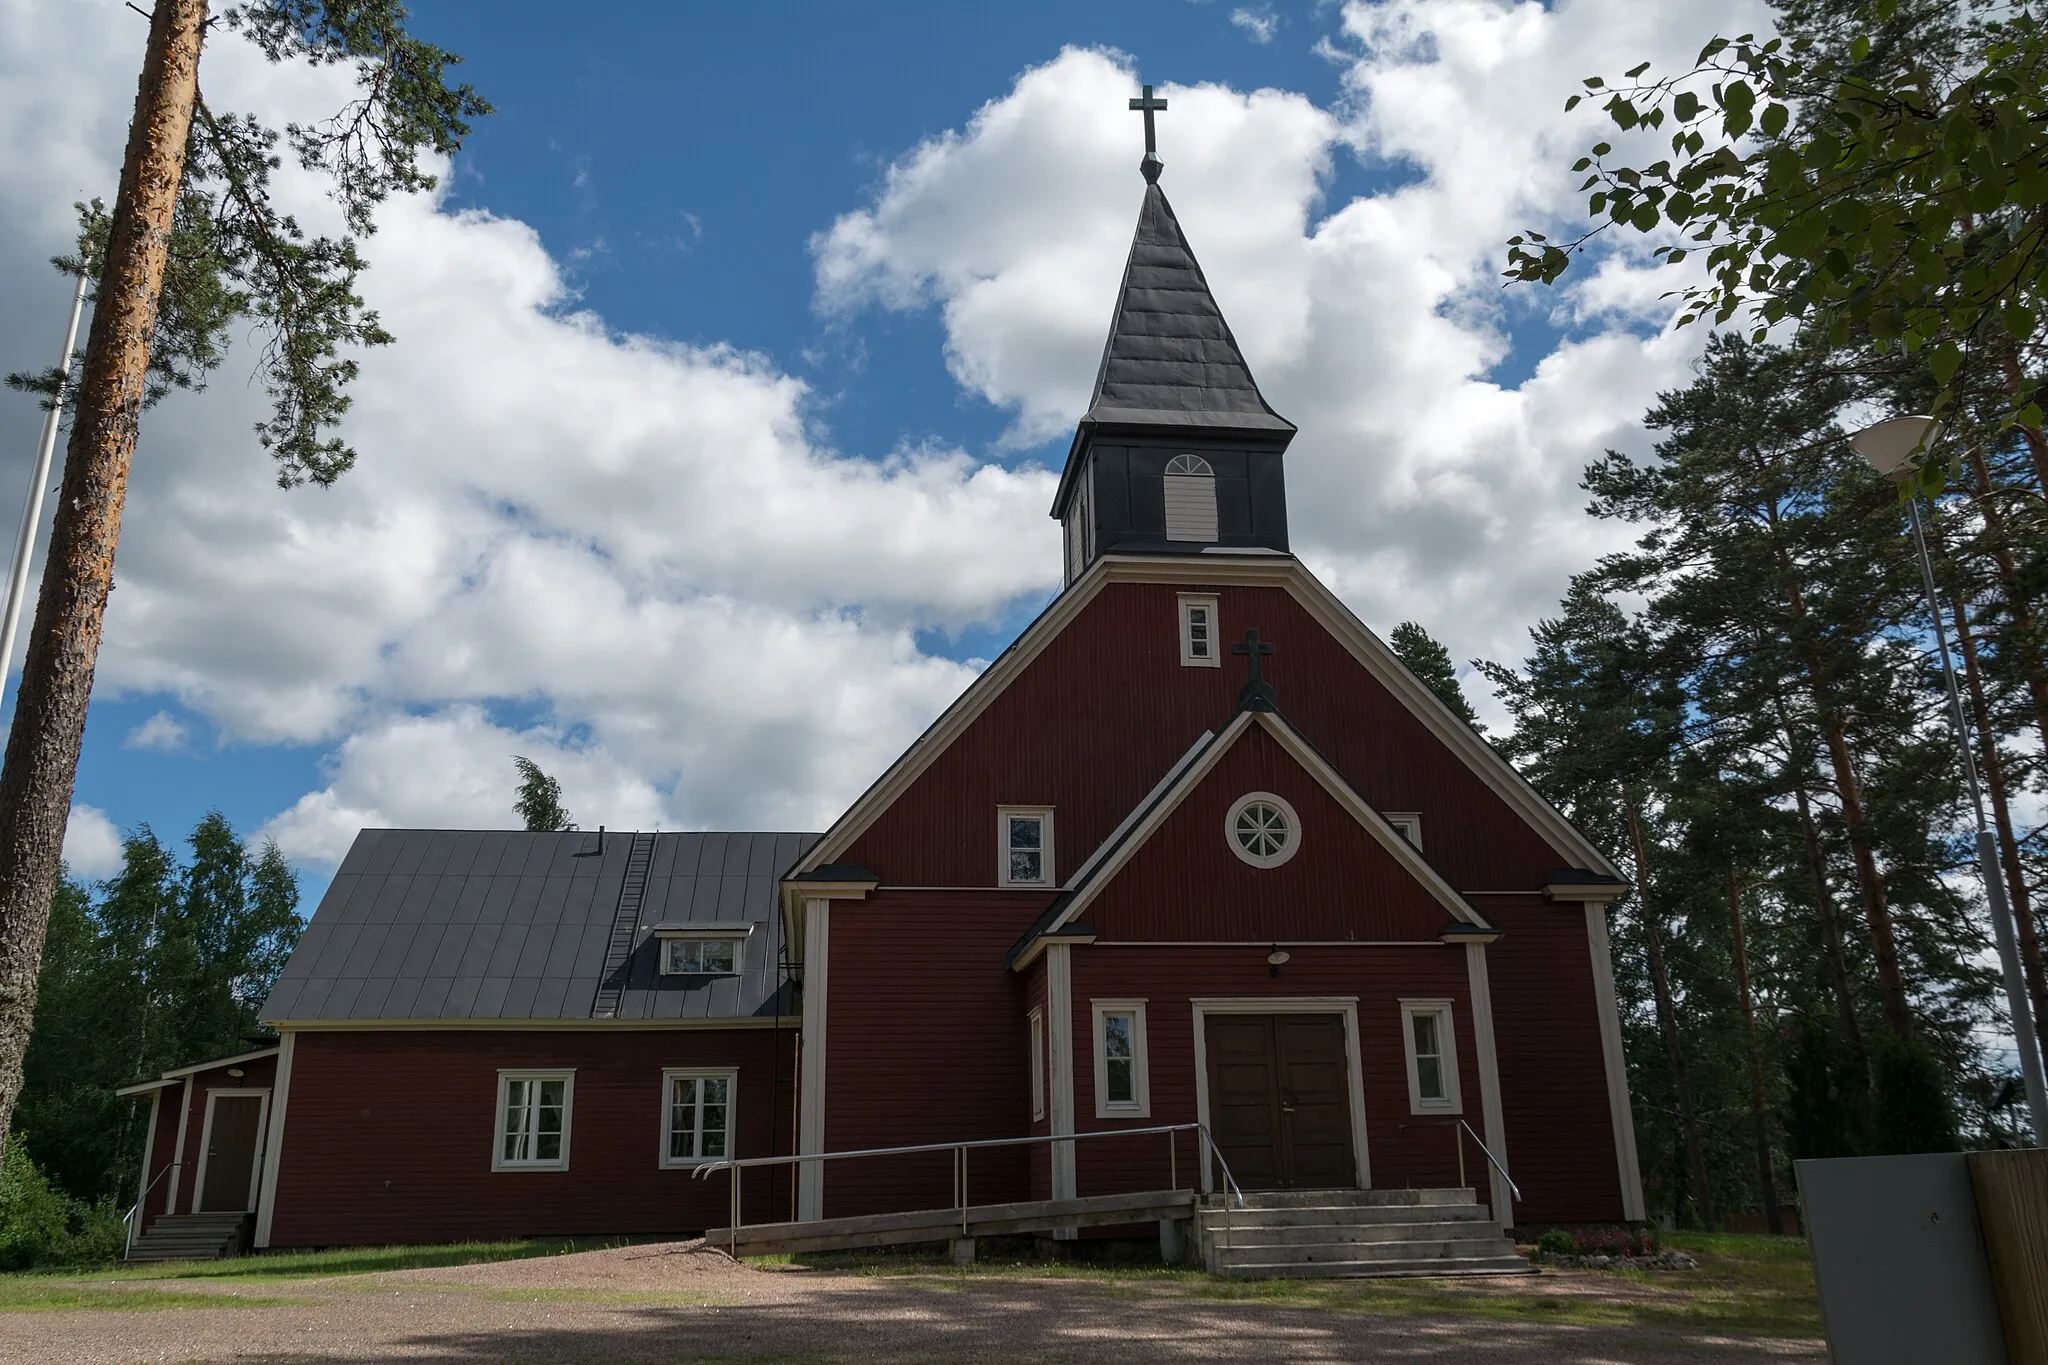 Photo showing: Tuohikotti Village Church in Kouvola, Finland, was designed by Anton Lehto, and completed in 1926.